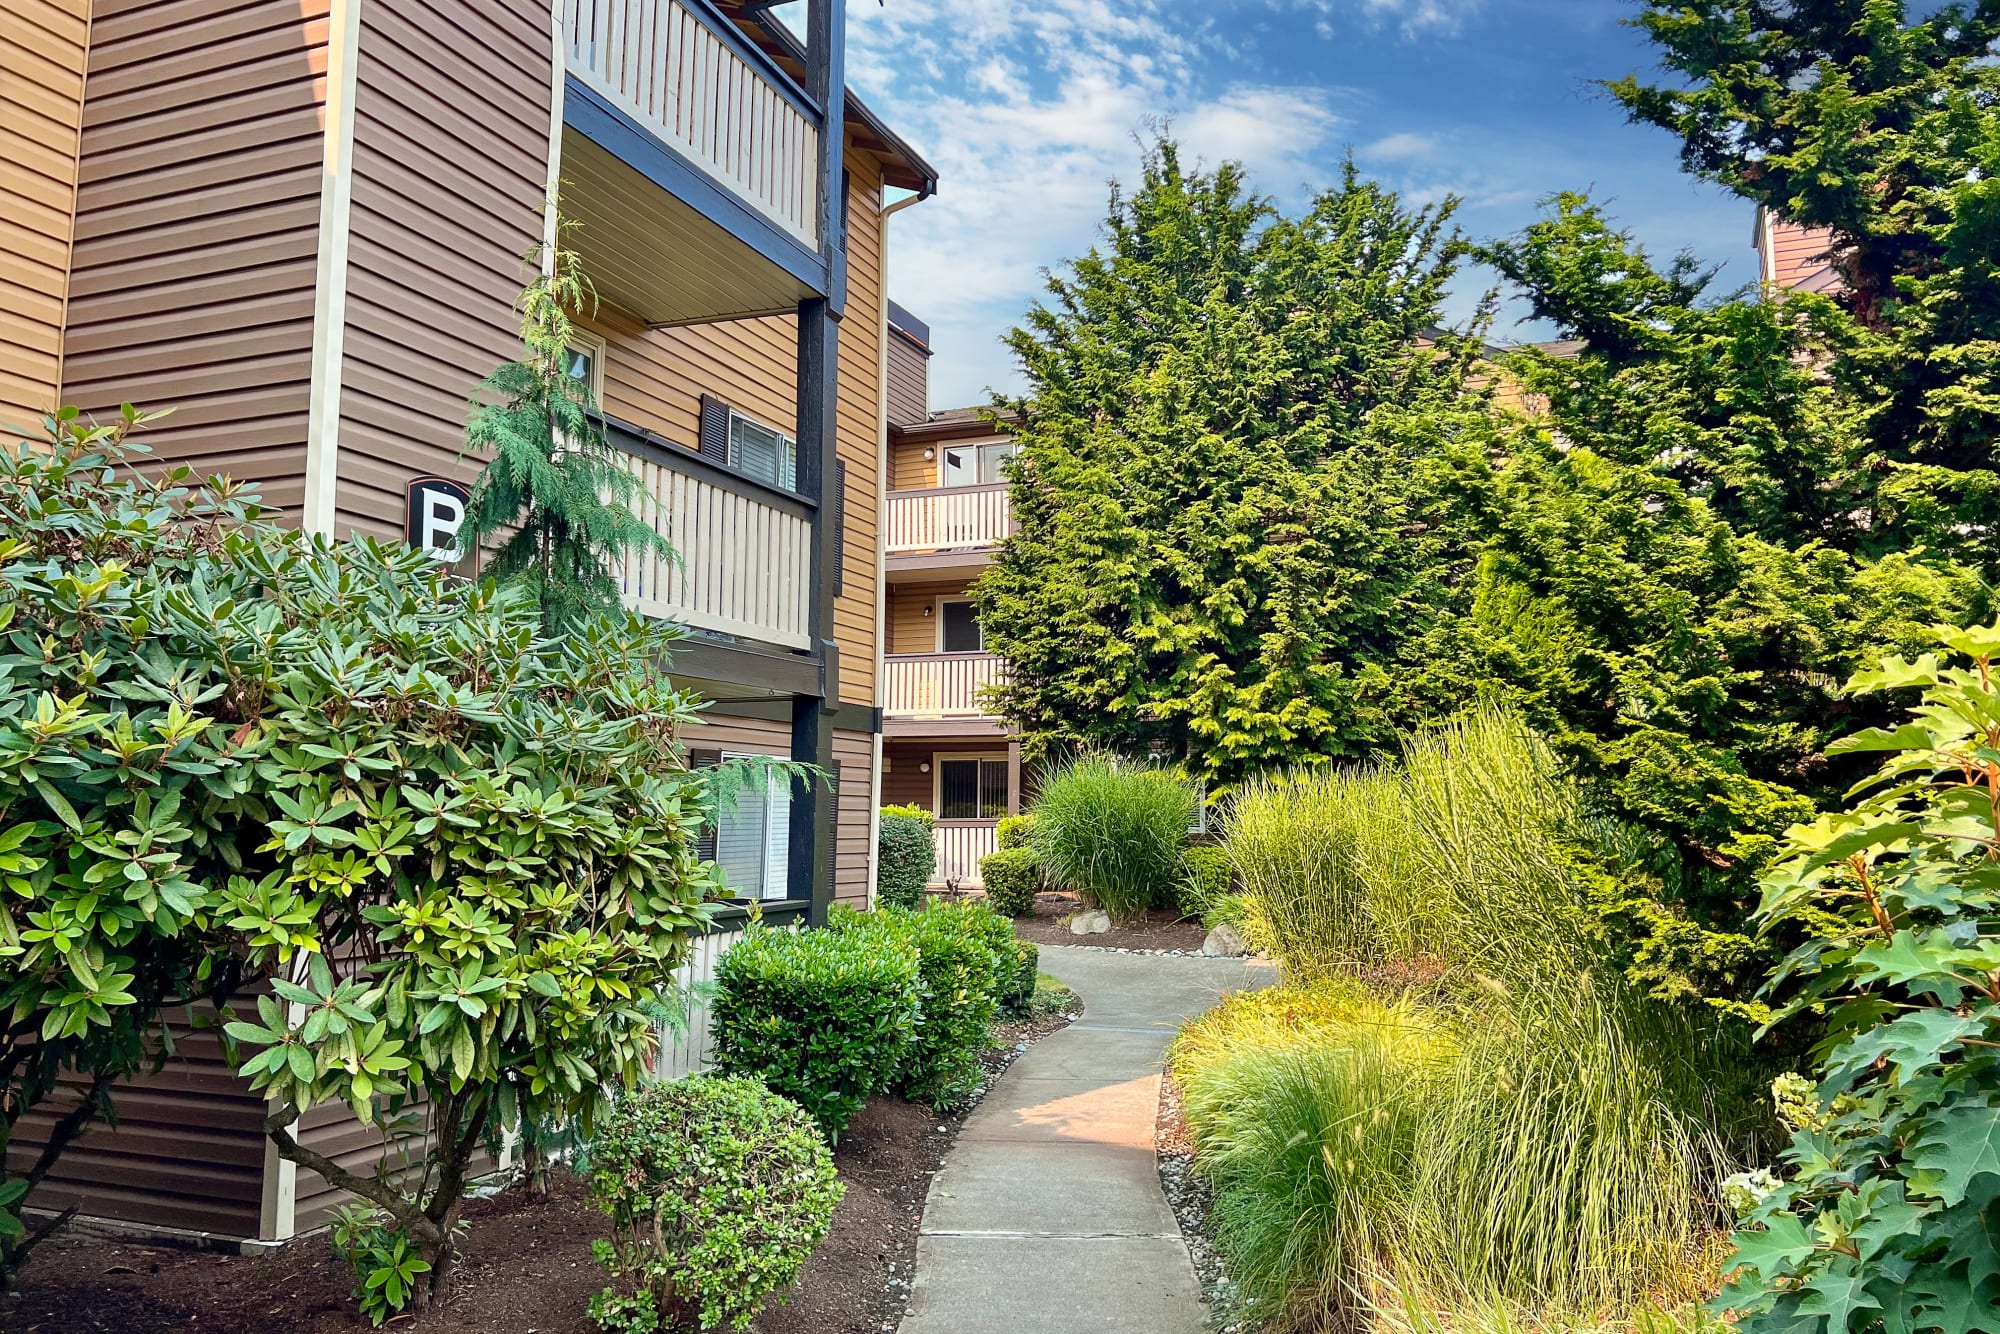 Beautifully landscaped exterior view of property at Newport Crossing Apartments in Newcastle, Washington